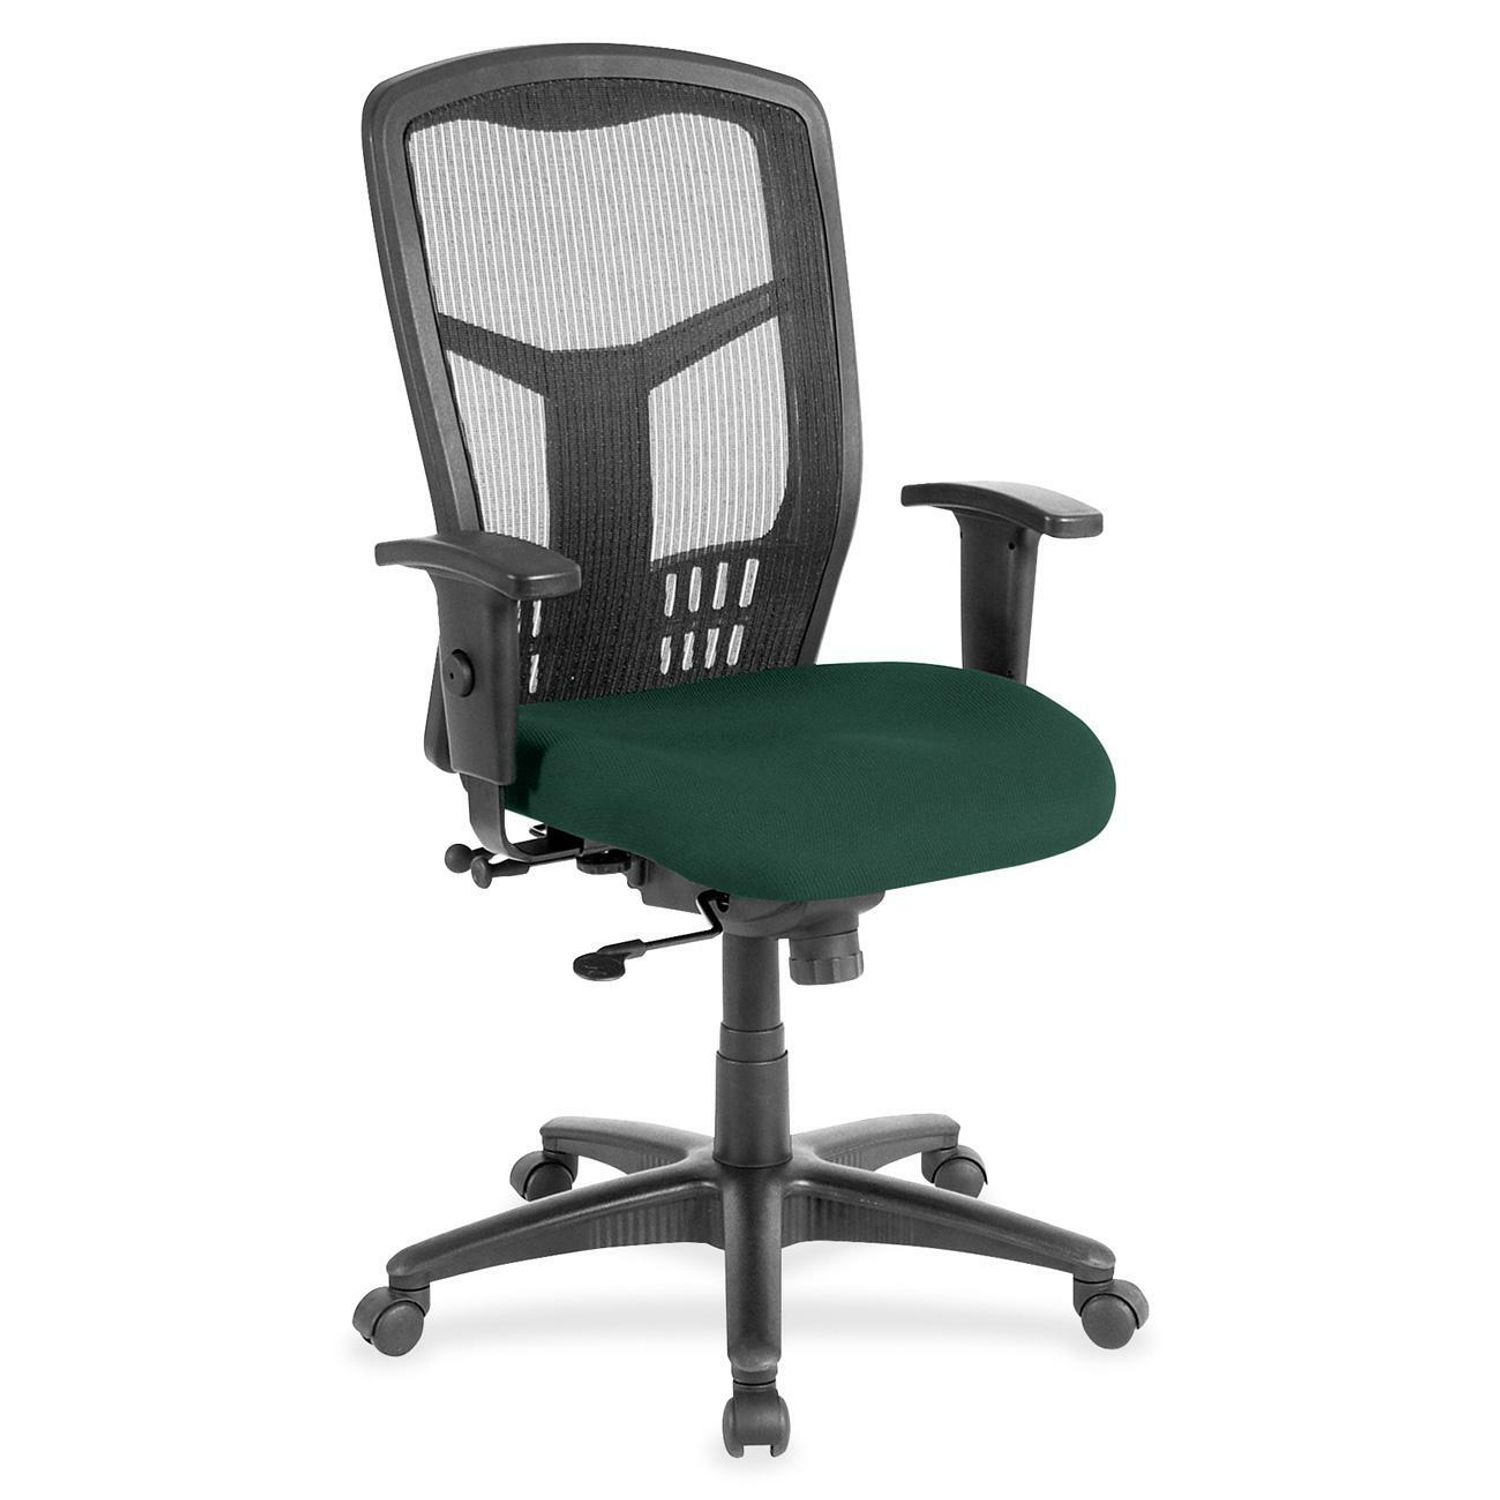 High-Back Executive Chair Insight Forest Fabric Seat, Steel Frame, 1 Each